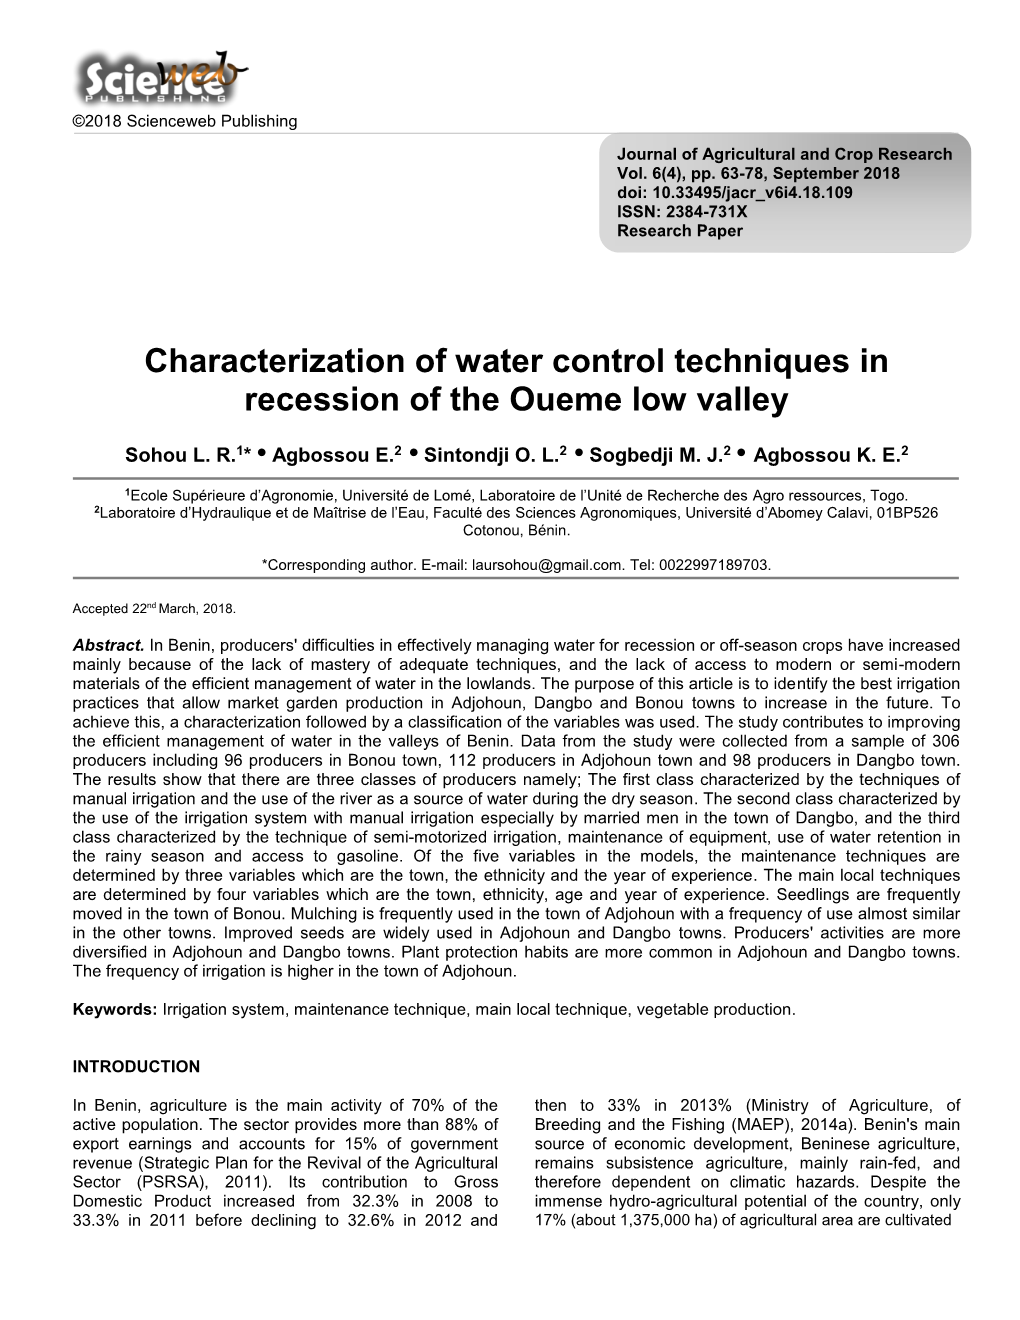 Characterization of Water Control Techniques in Recession of the Oueme Low Valley